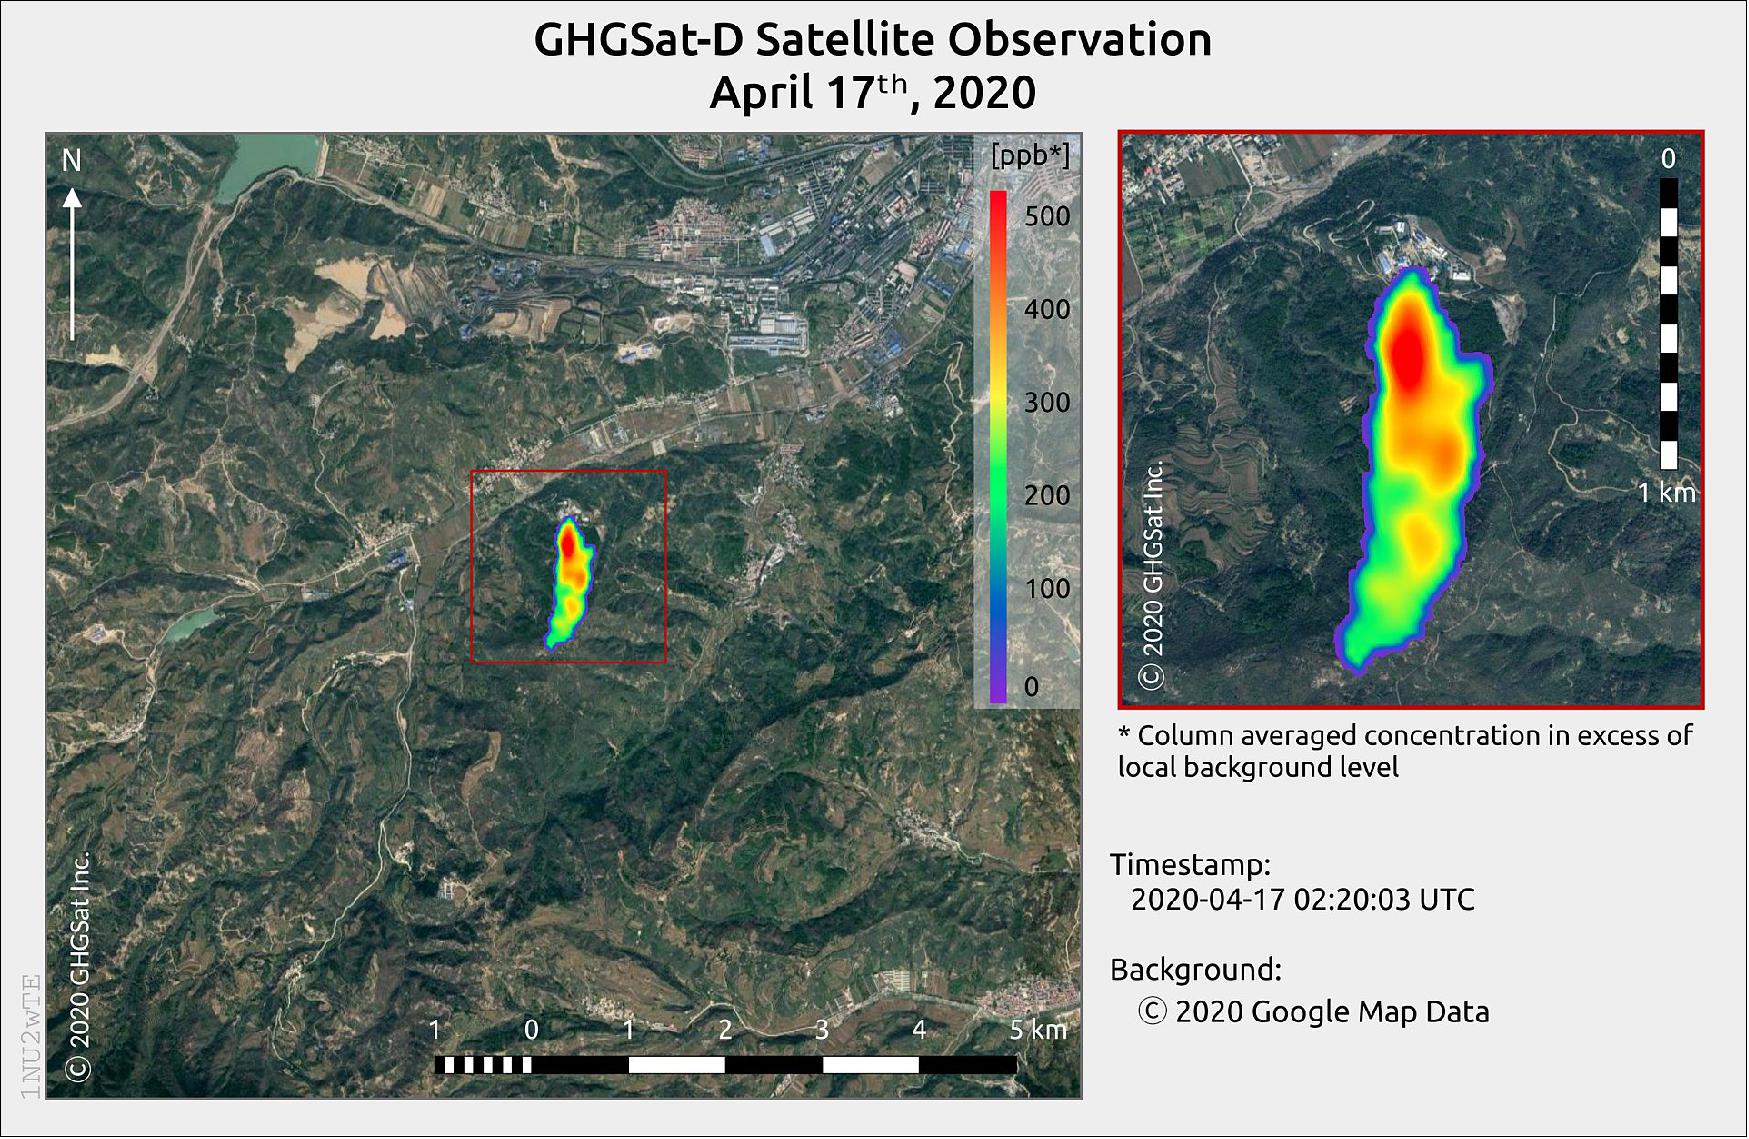 Figure 65: GHGSat methane concentrations over a coal mine in the Shanxi province, China. This image shows GHGSat methane concentrations over a coal mine in the Shanxi province, China (image credit: GHGSat)